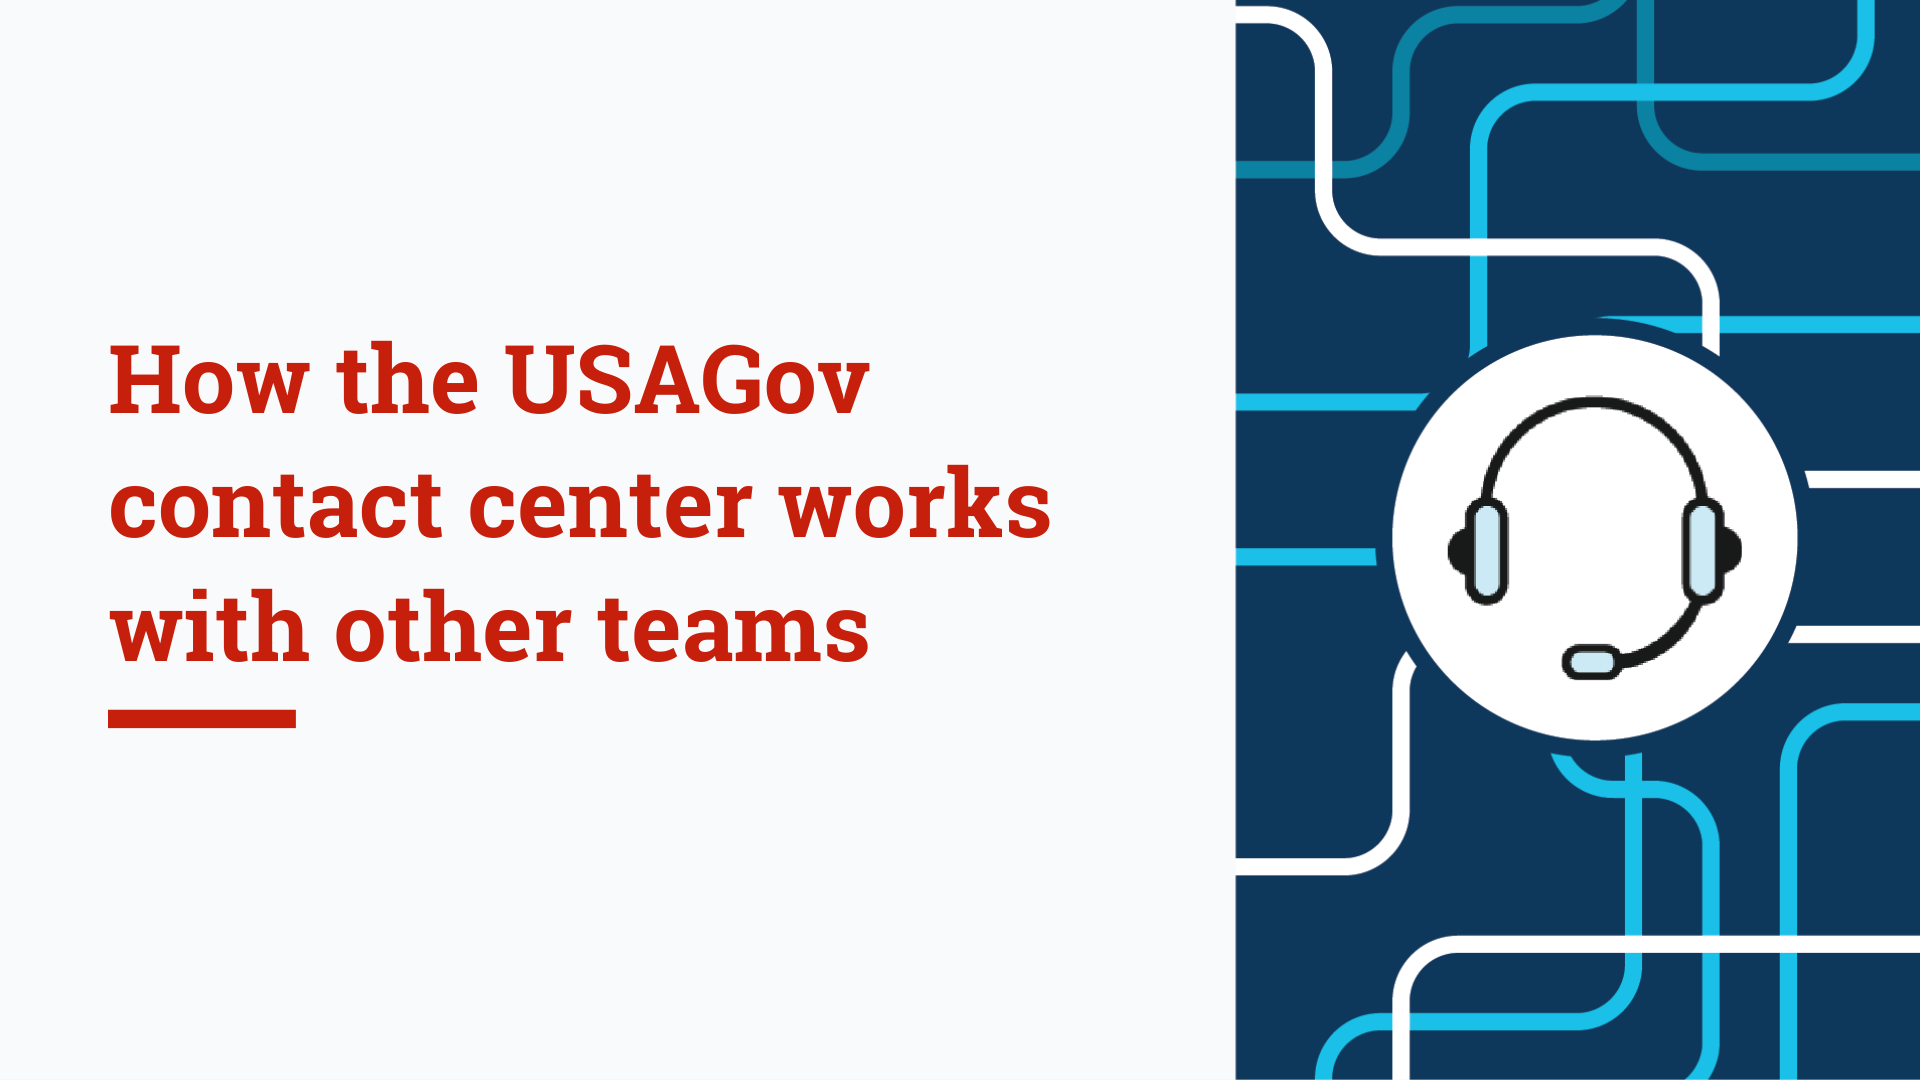 How the USAGov contact center works with other teams